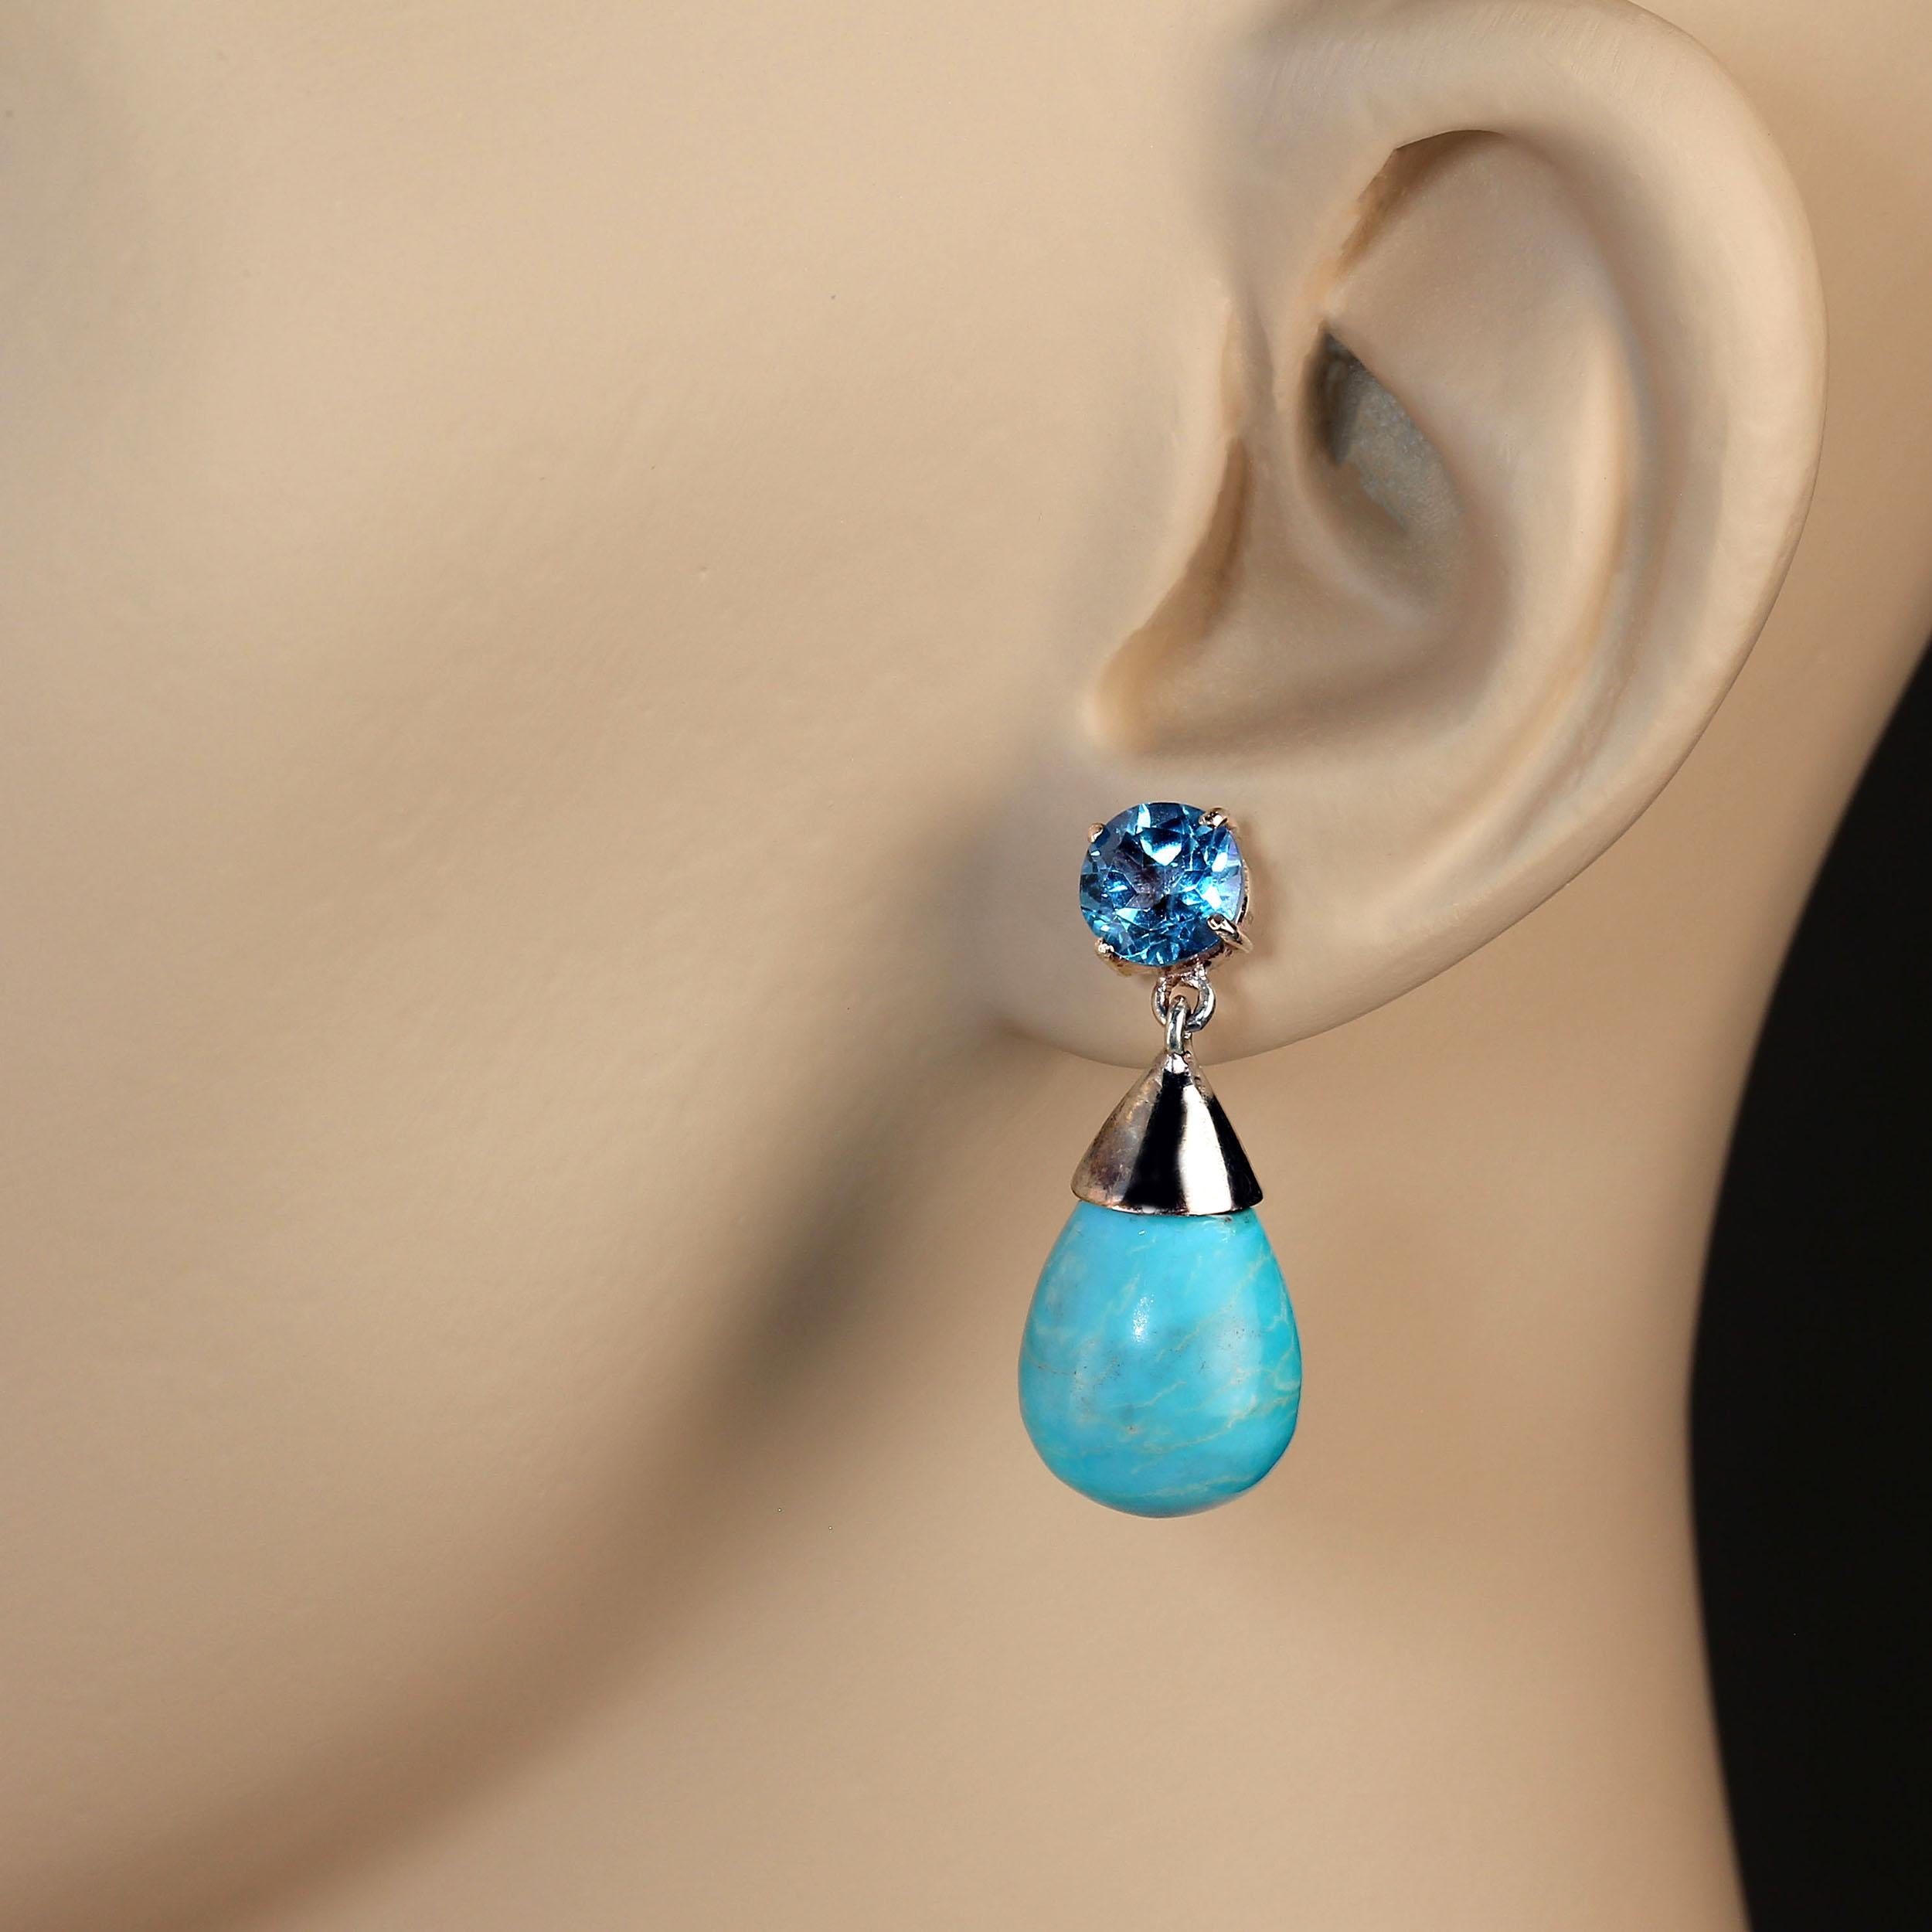 Earrings of rare, elegant Sleeping Beauty Turquoise Briolette drops and round sparkling apatites.  This combinations is show stopping!  These beauties are hand set in Sterling Silver and feature post backs.  They hang 1 1/8 inches in length. ME2115